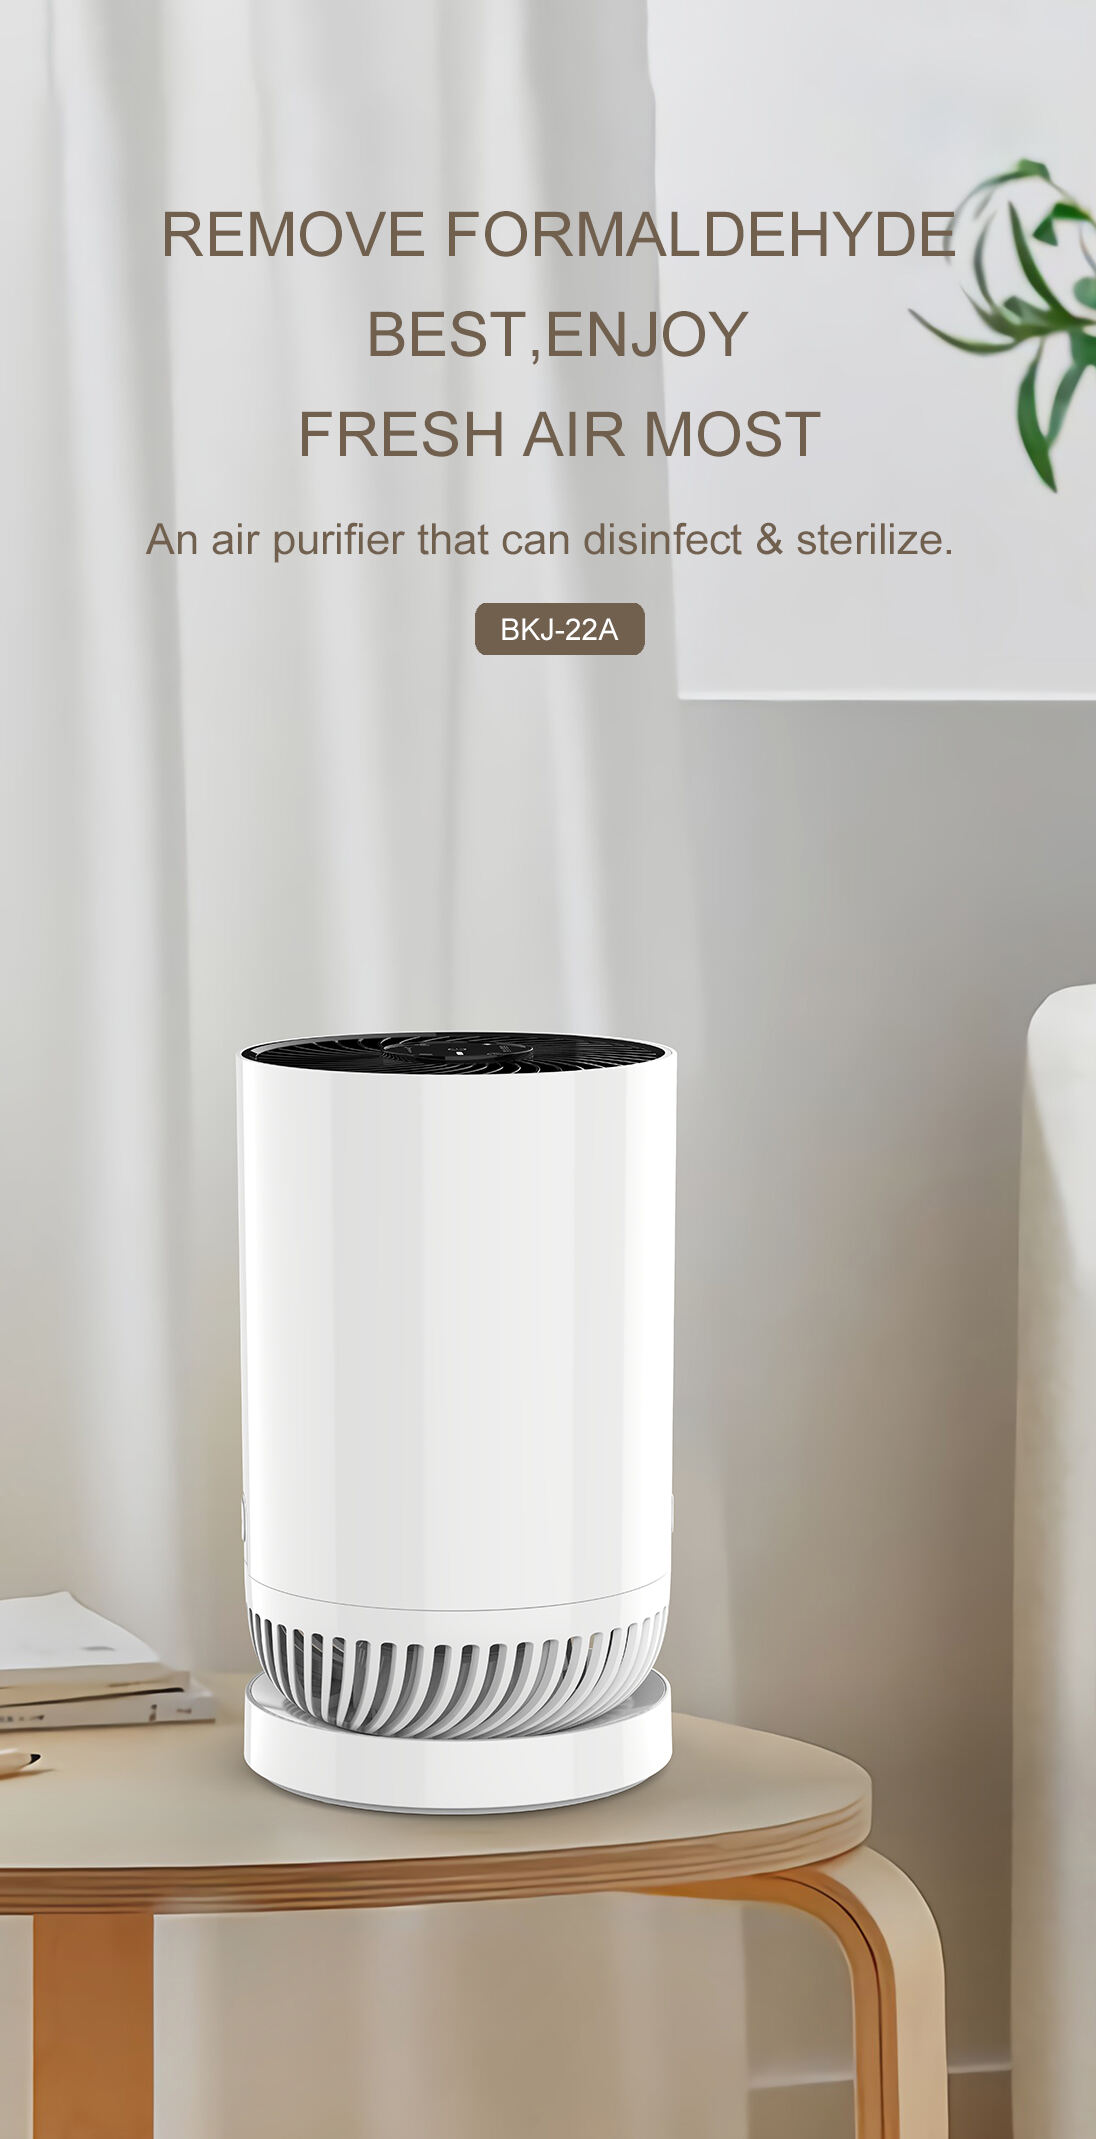 Hepa Filter Home Air Purifier with Wifi Smart home appliances details